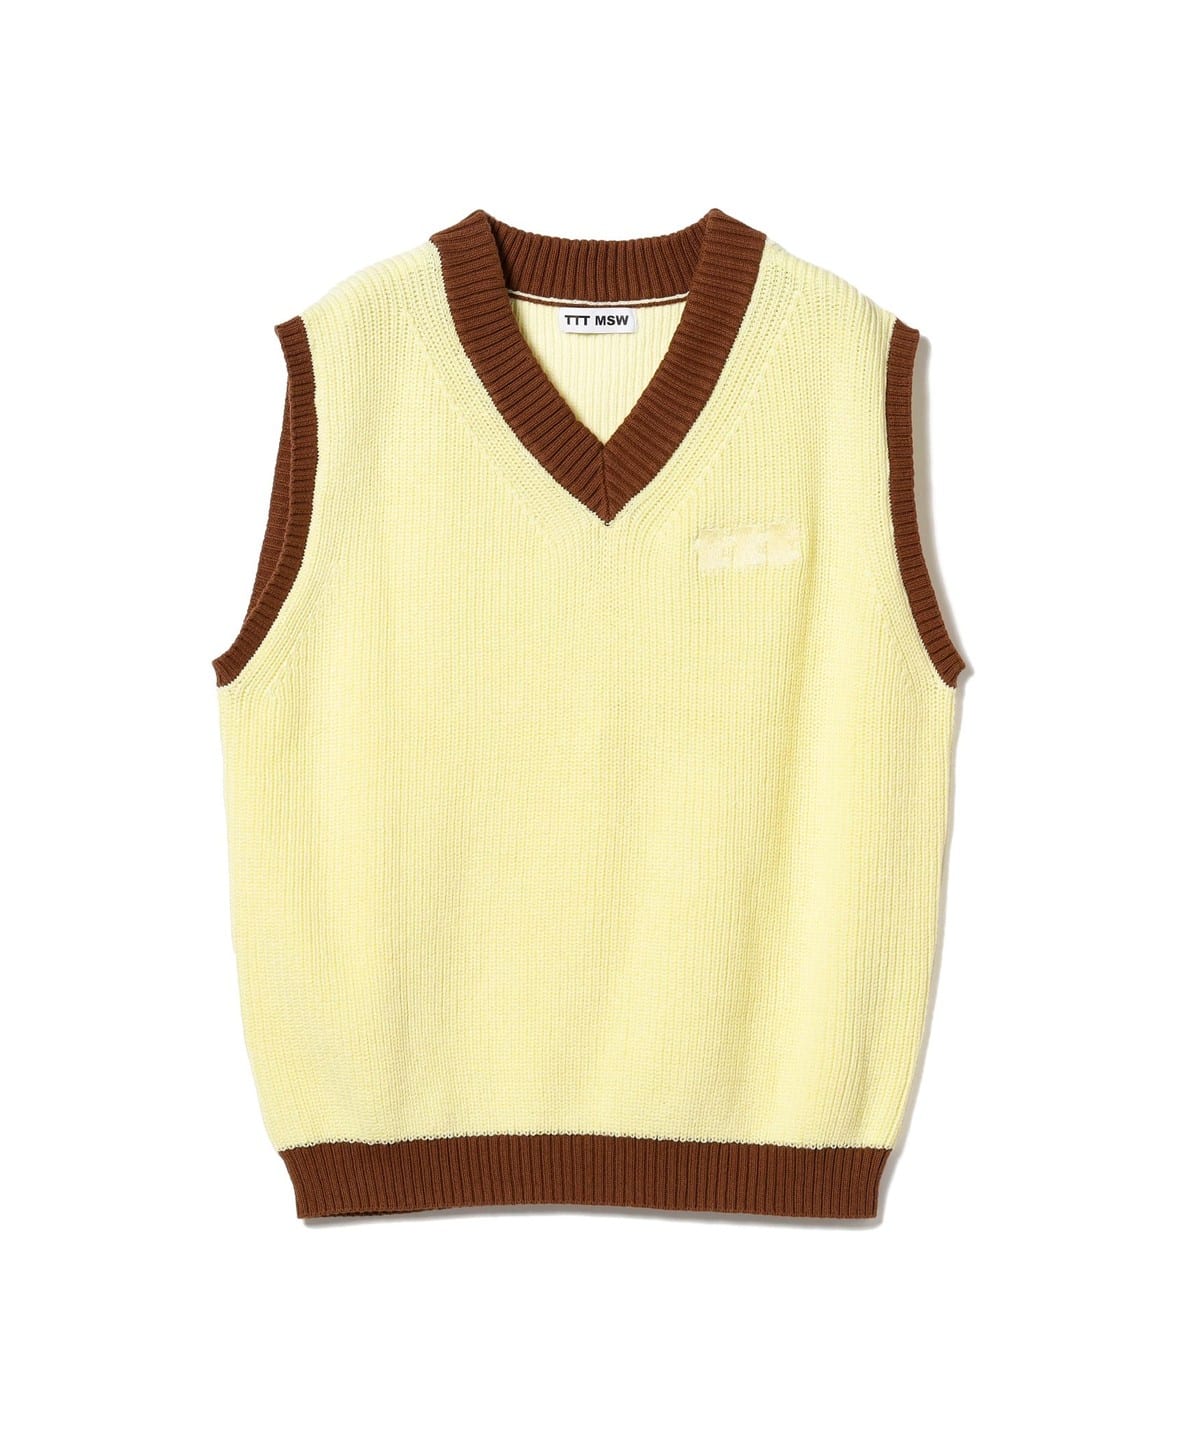 BEAMS（ビームス）TTTMSW / New Standard Knit Vest（トップス ベスト